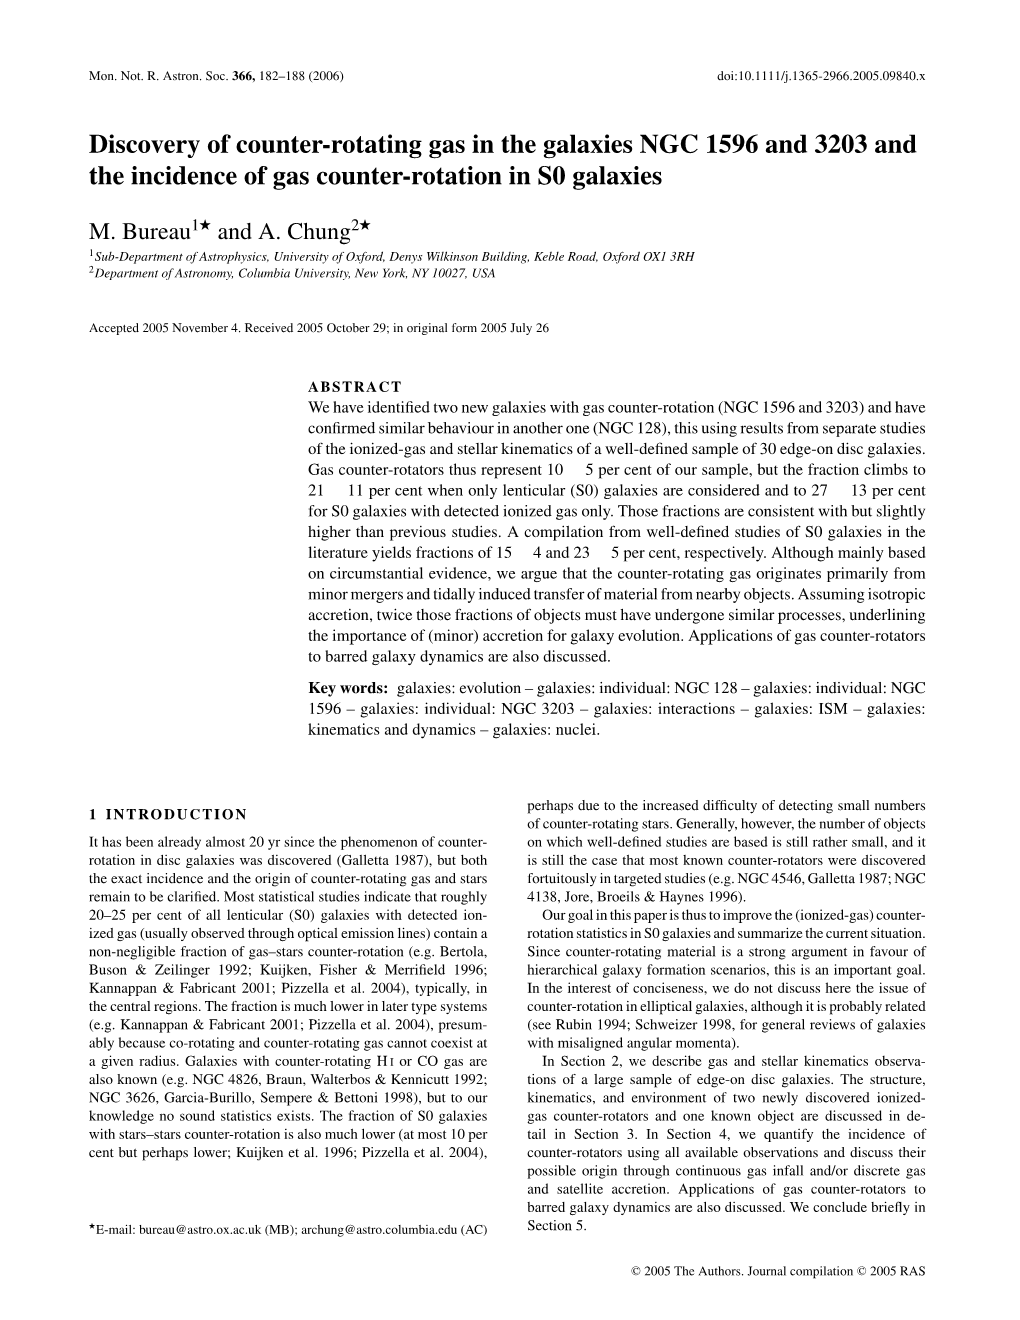 Discovery of Counter-Rotating Gas in the Galaxies NGC 1596 and 3203 and the Incidence of Gas Counter-Rotation in S0 Galaxies